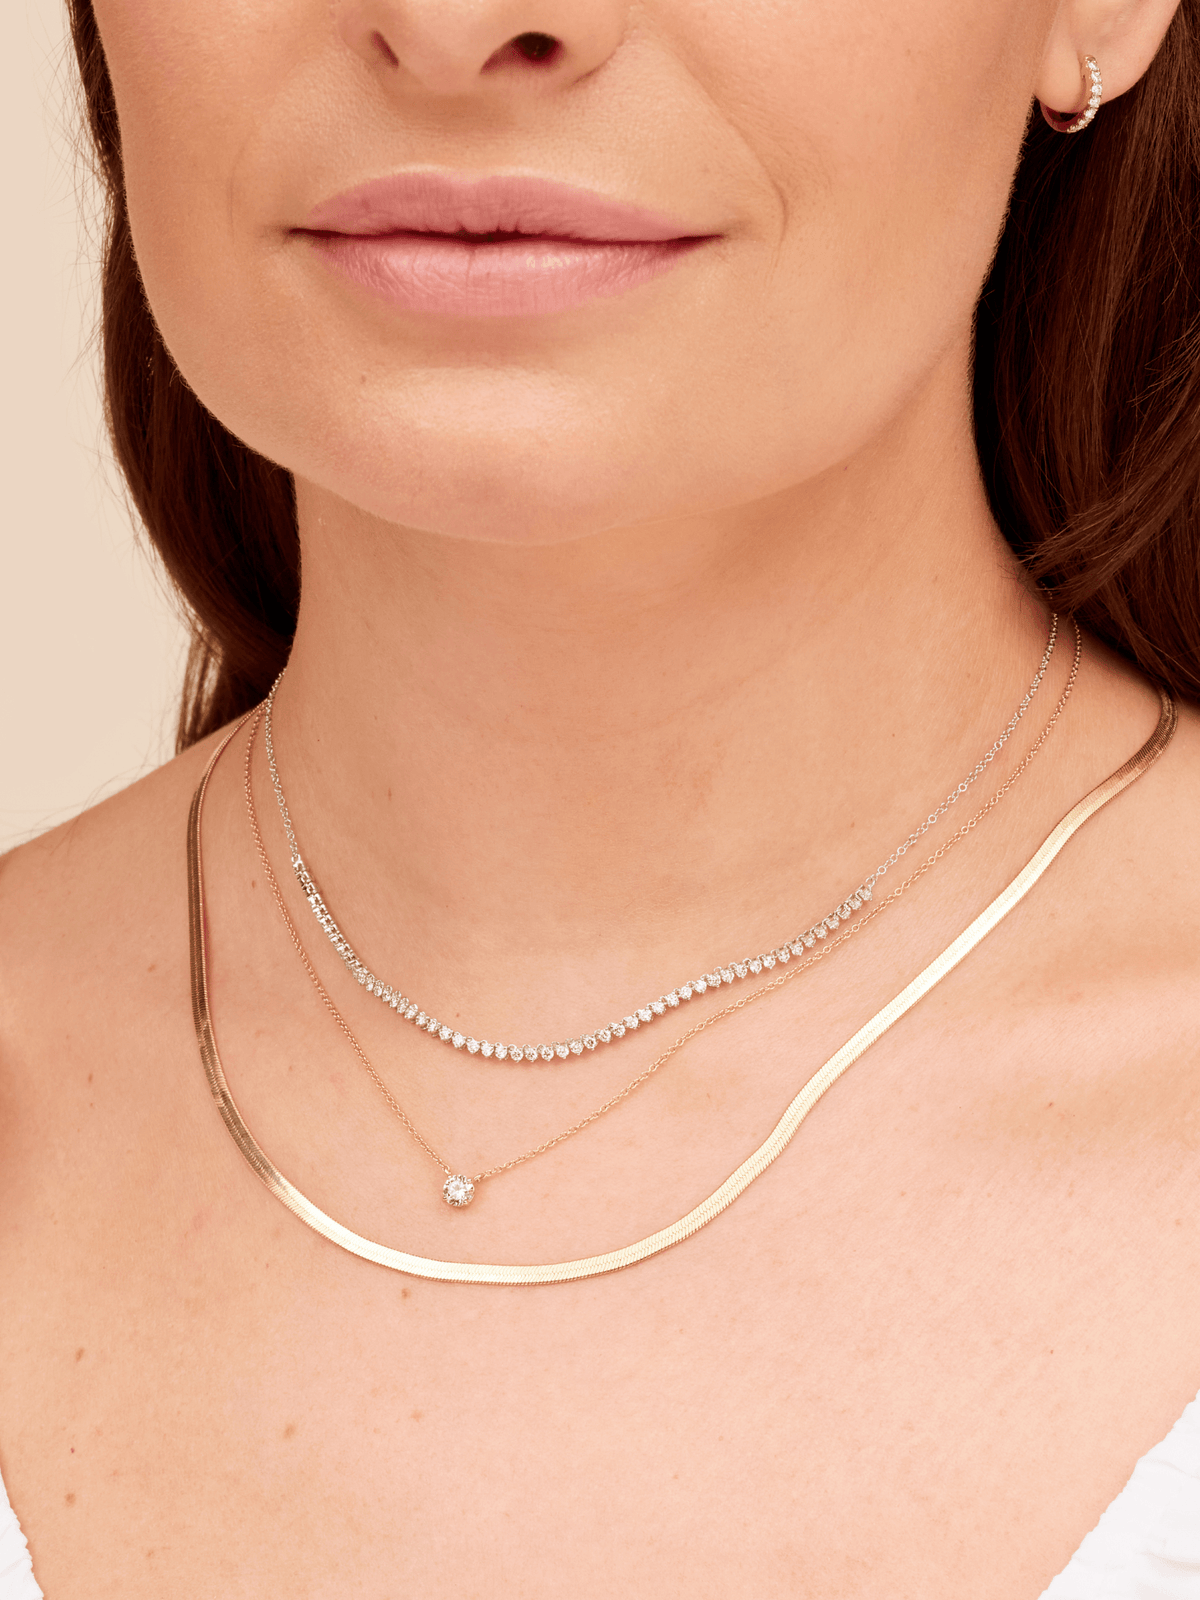 Diamond tennis chain necklace in 14K white gold layered with herringbone snake gold chain necklace and thin gold chain with single diamond